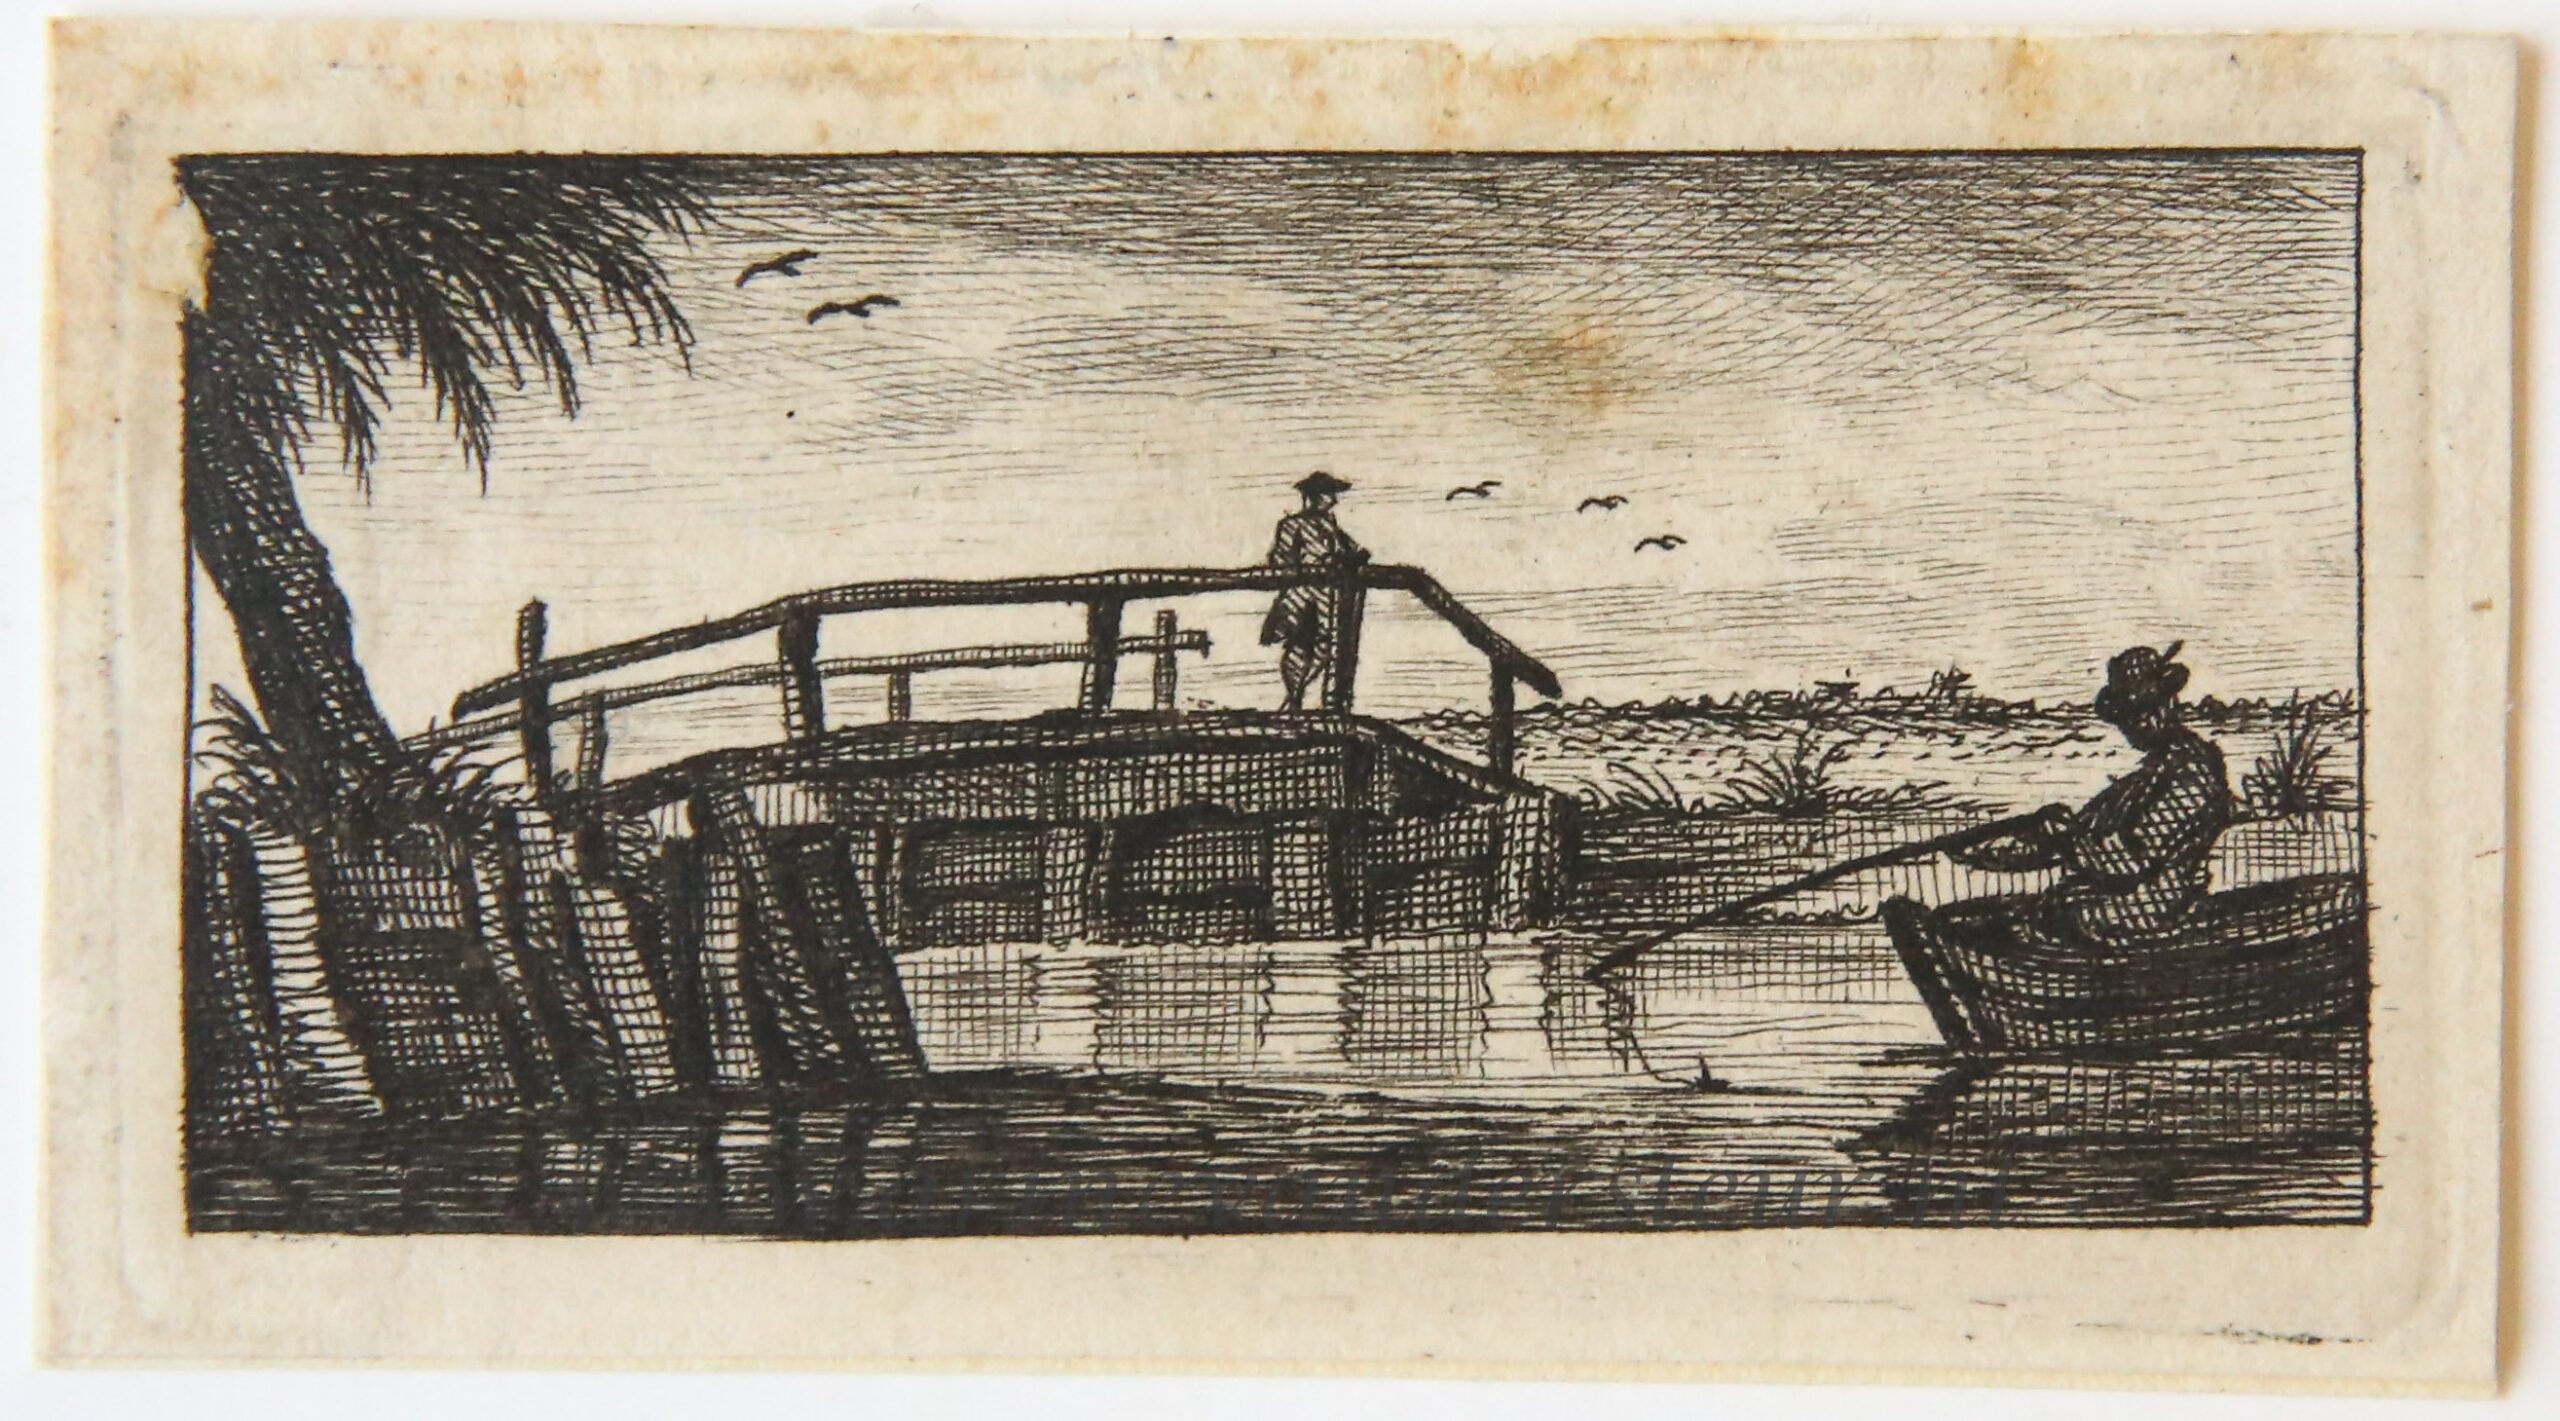 [Antique print, etching] View on a canal with a wooden bridge, published 1766.